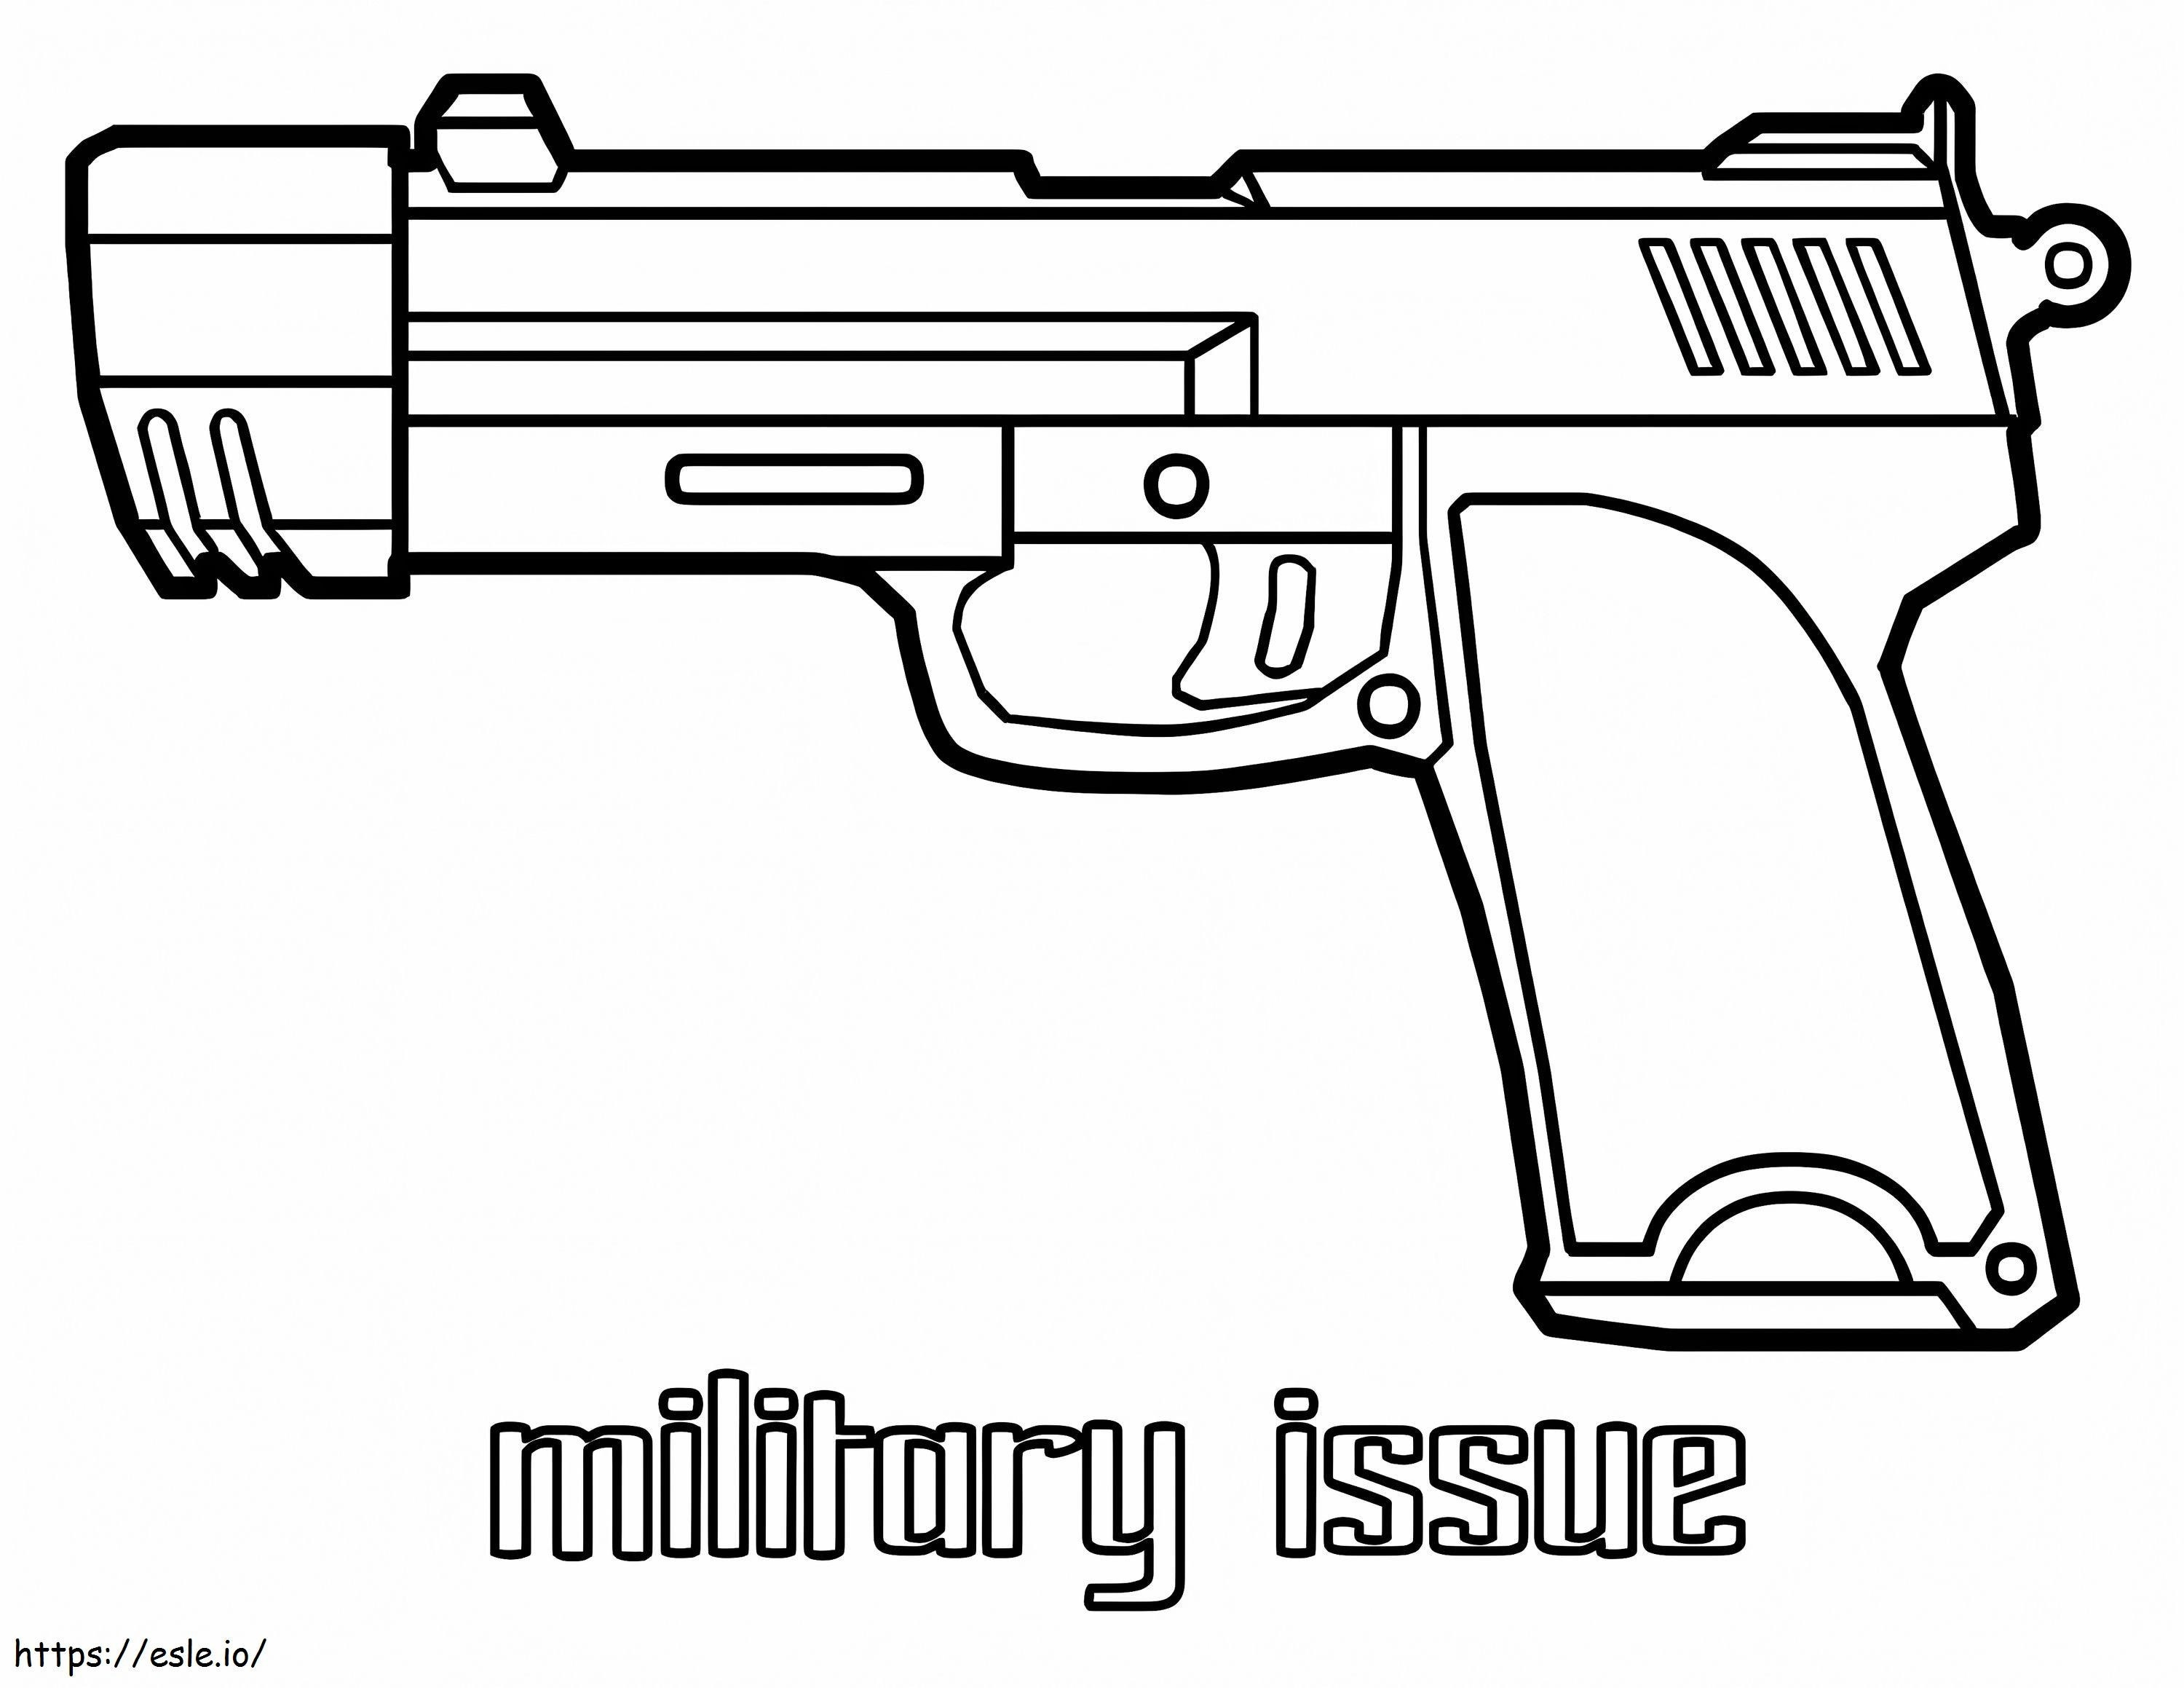 Military Issue coloring page